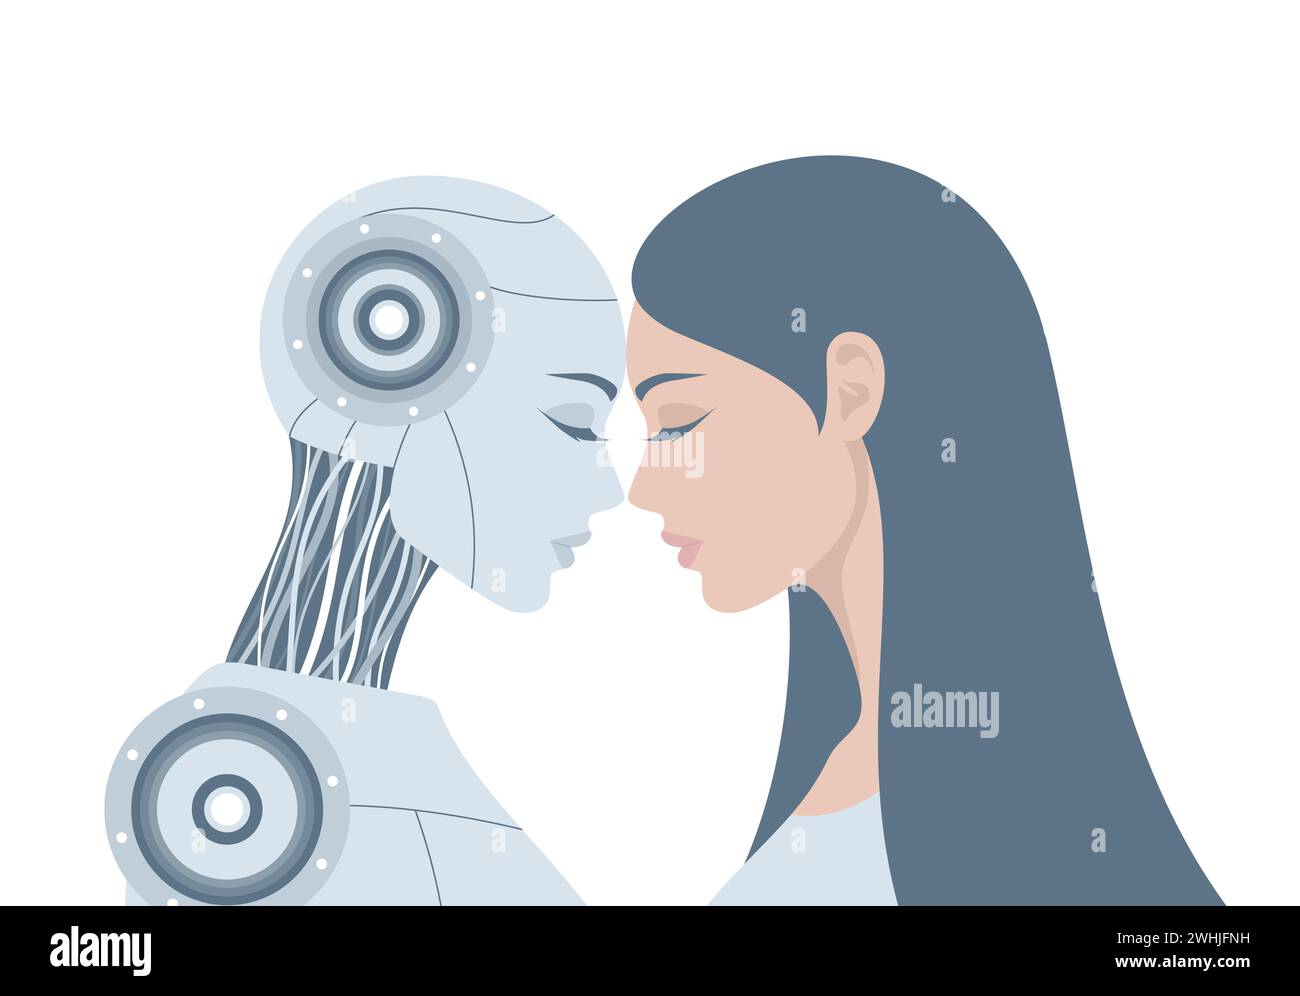 Female humanoid robot and human woman standing together, leaning their foreheads against each other, isolated on a white background. Flat vector illus Stock Vector